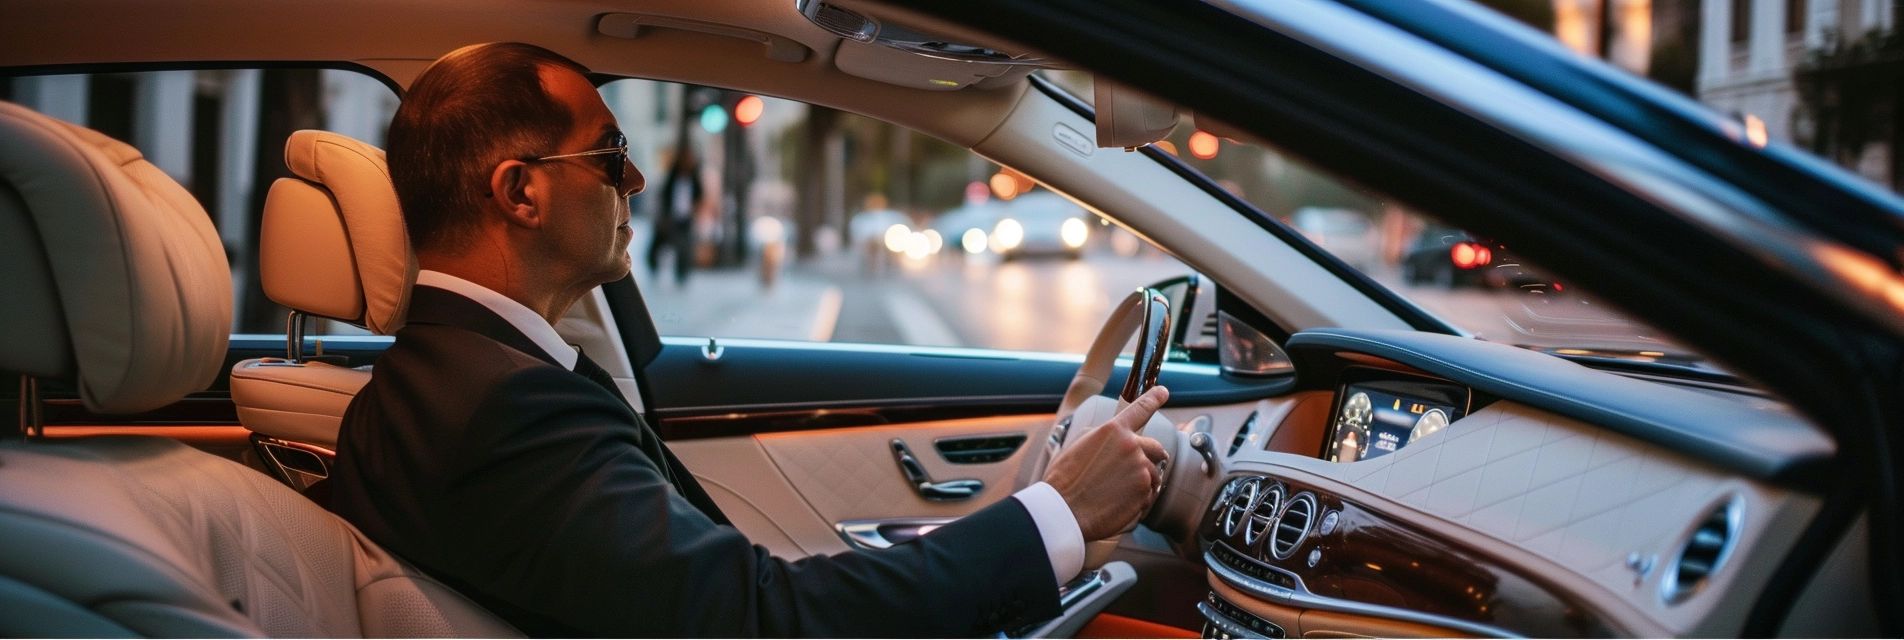 chauffeur behind the wheel providing limo service in upper west side ny